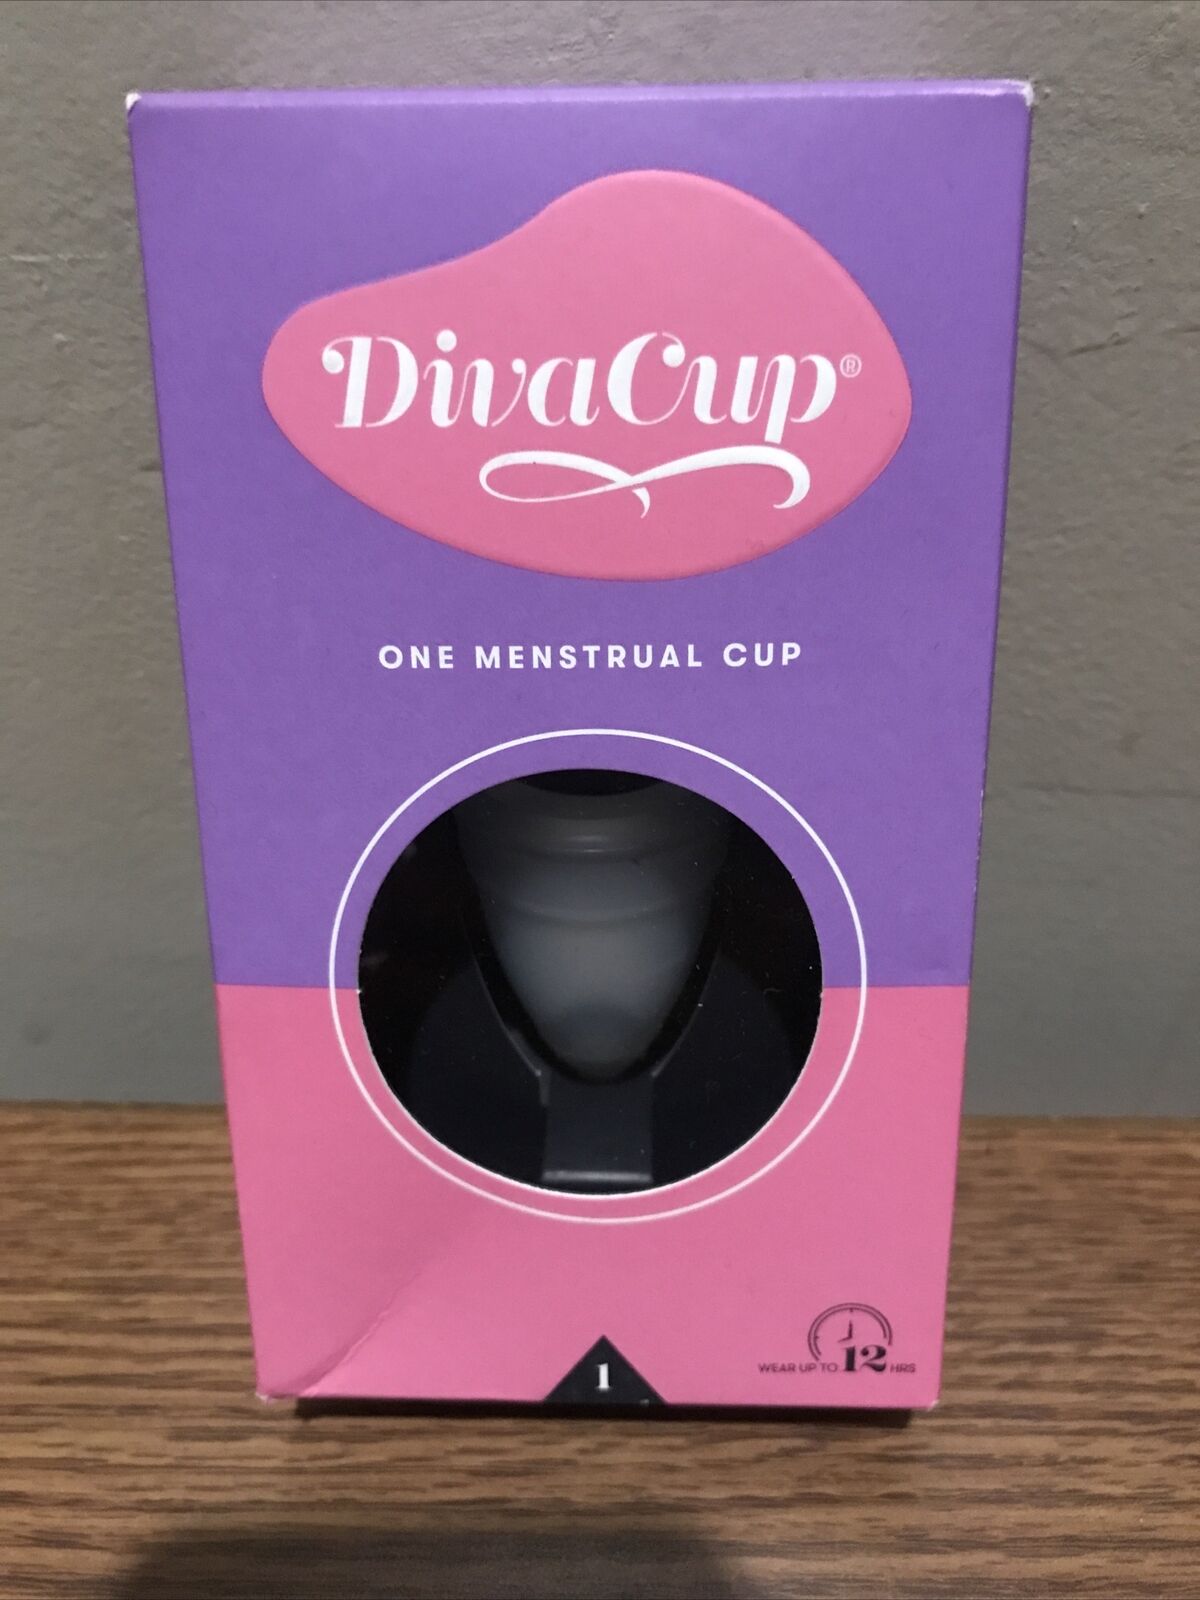 1 Of Brand New Divacup, Model 1, 1 Menstrual Cup Brand New Sealed In Box!